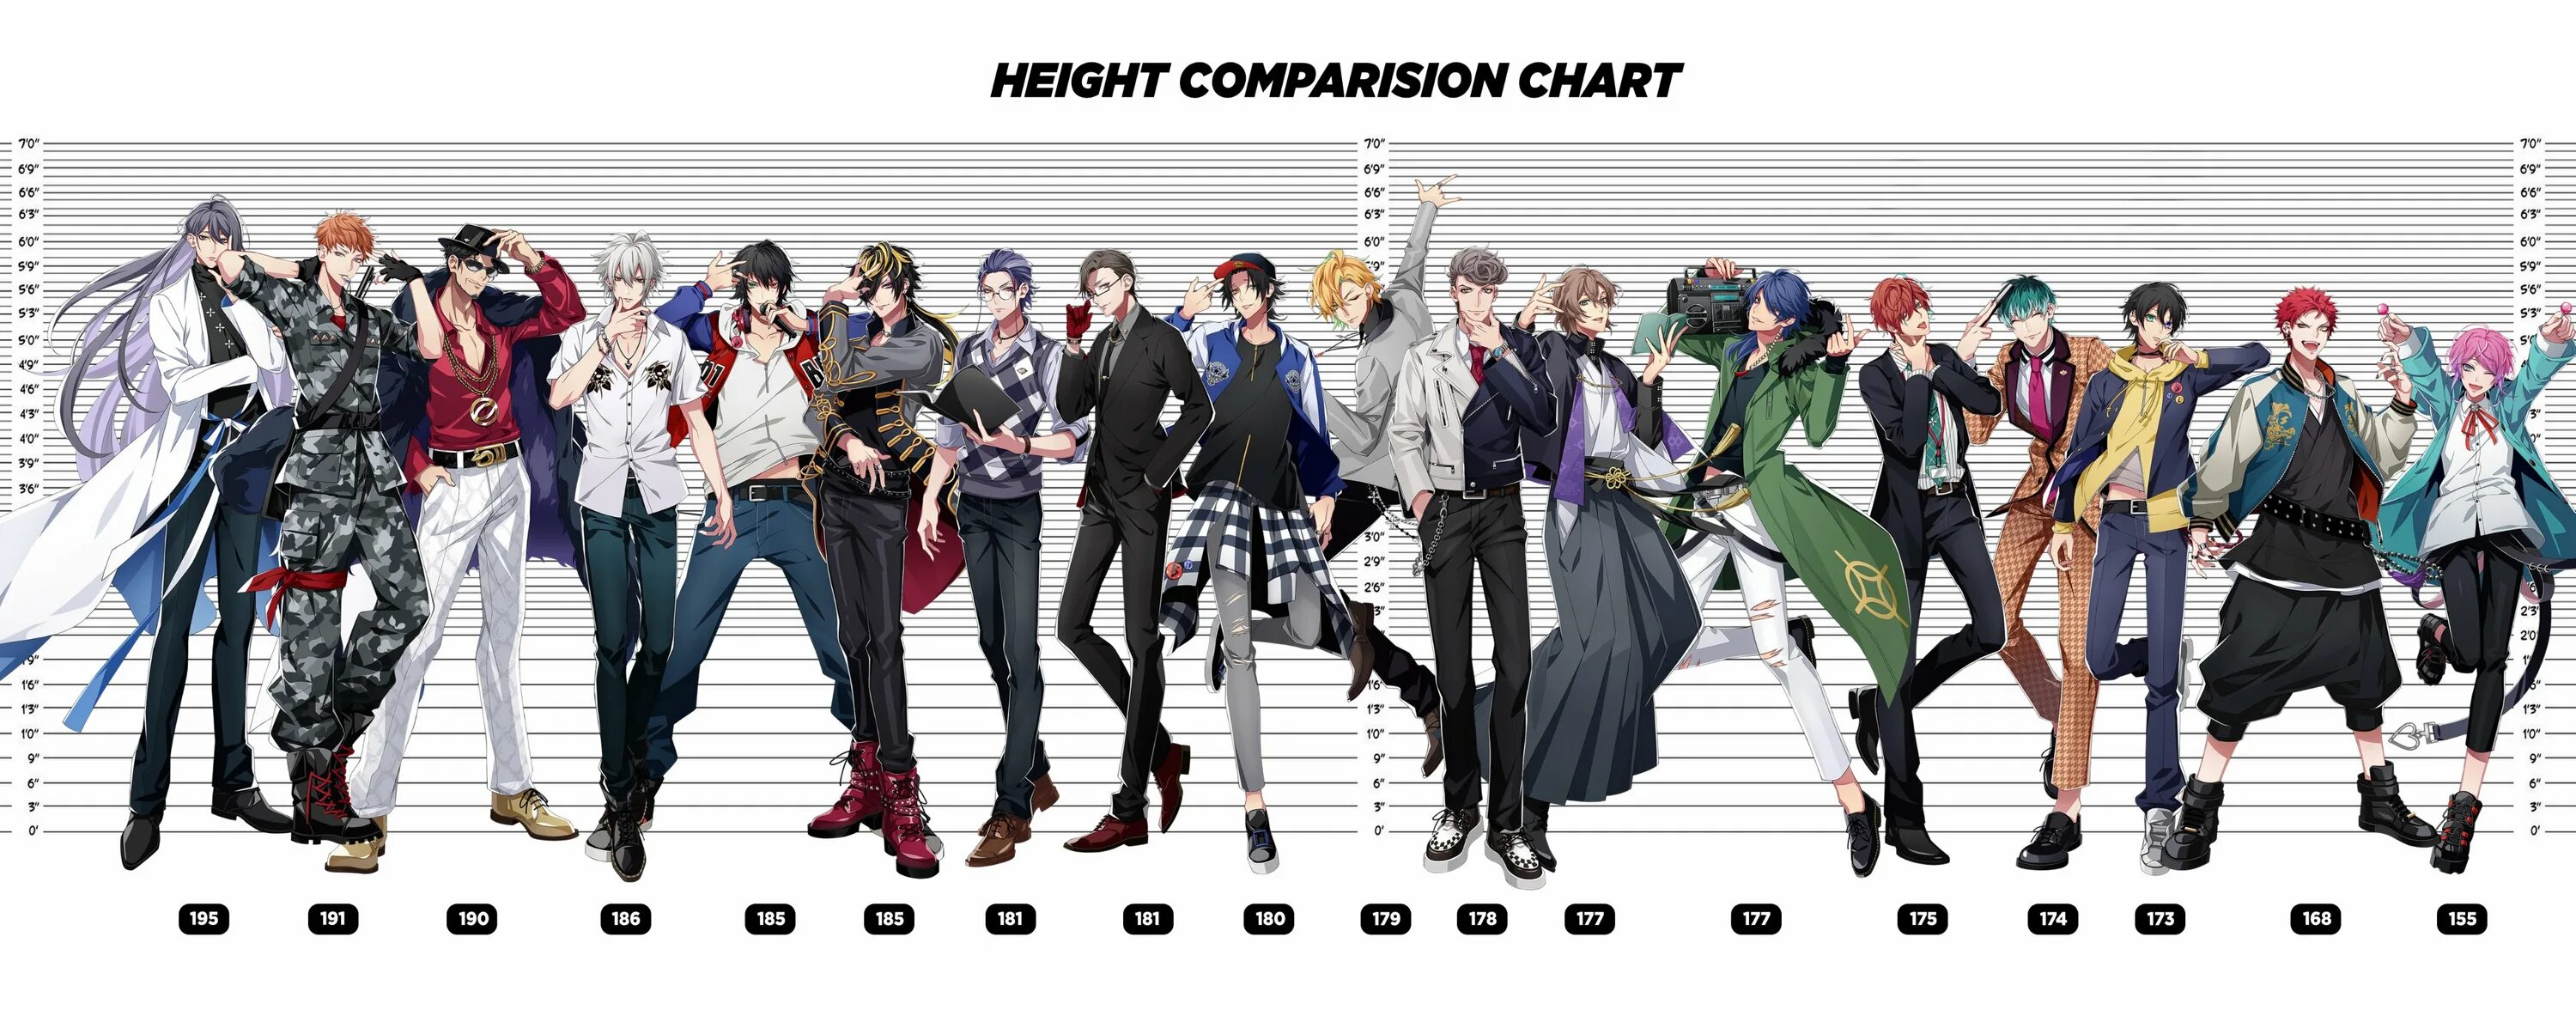 Scaling heights. Twisted Wonderland height. Twisted Wonderland height Comparison.